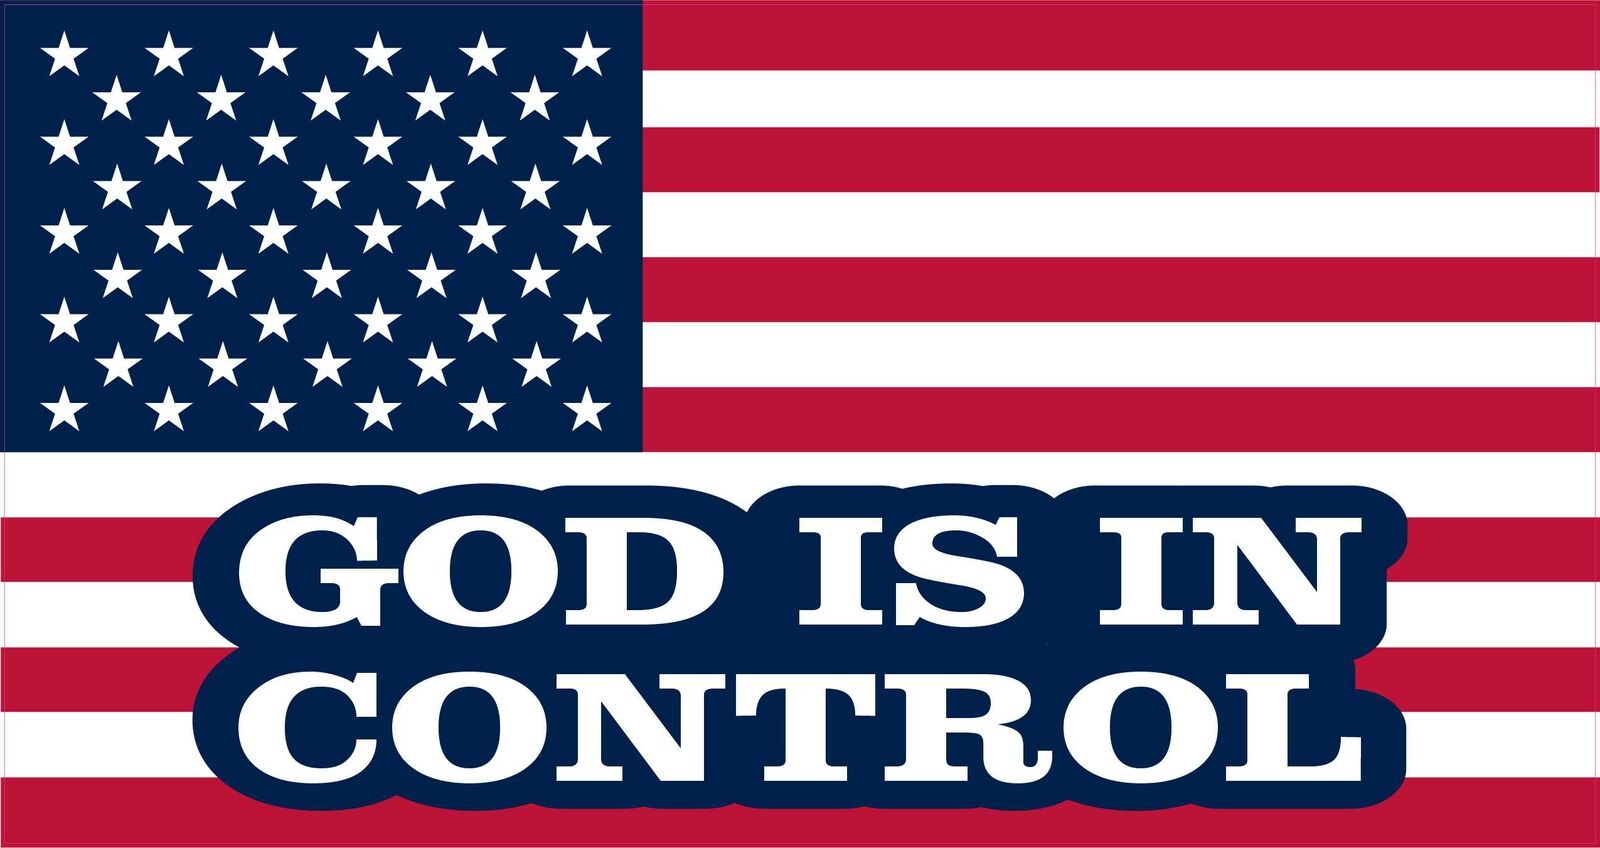 8.5in x 4.5in American Flag God Is in Control Magnet Car Vehicle Magnetic Sign